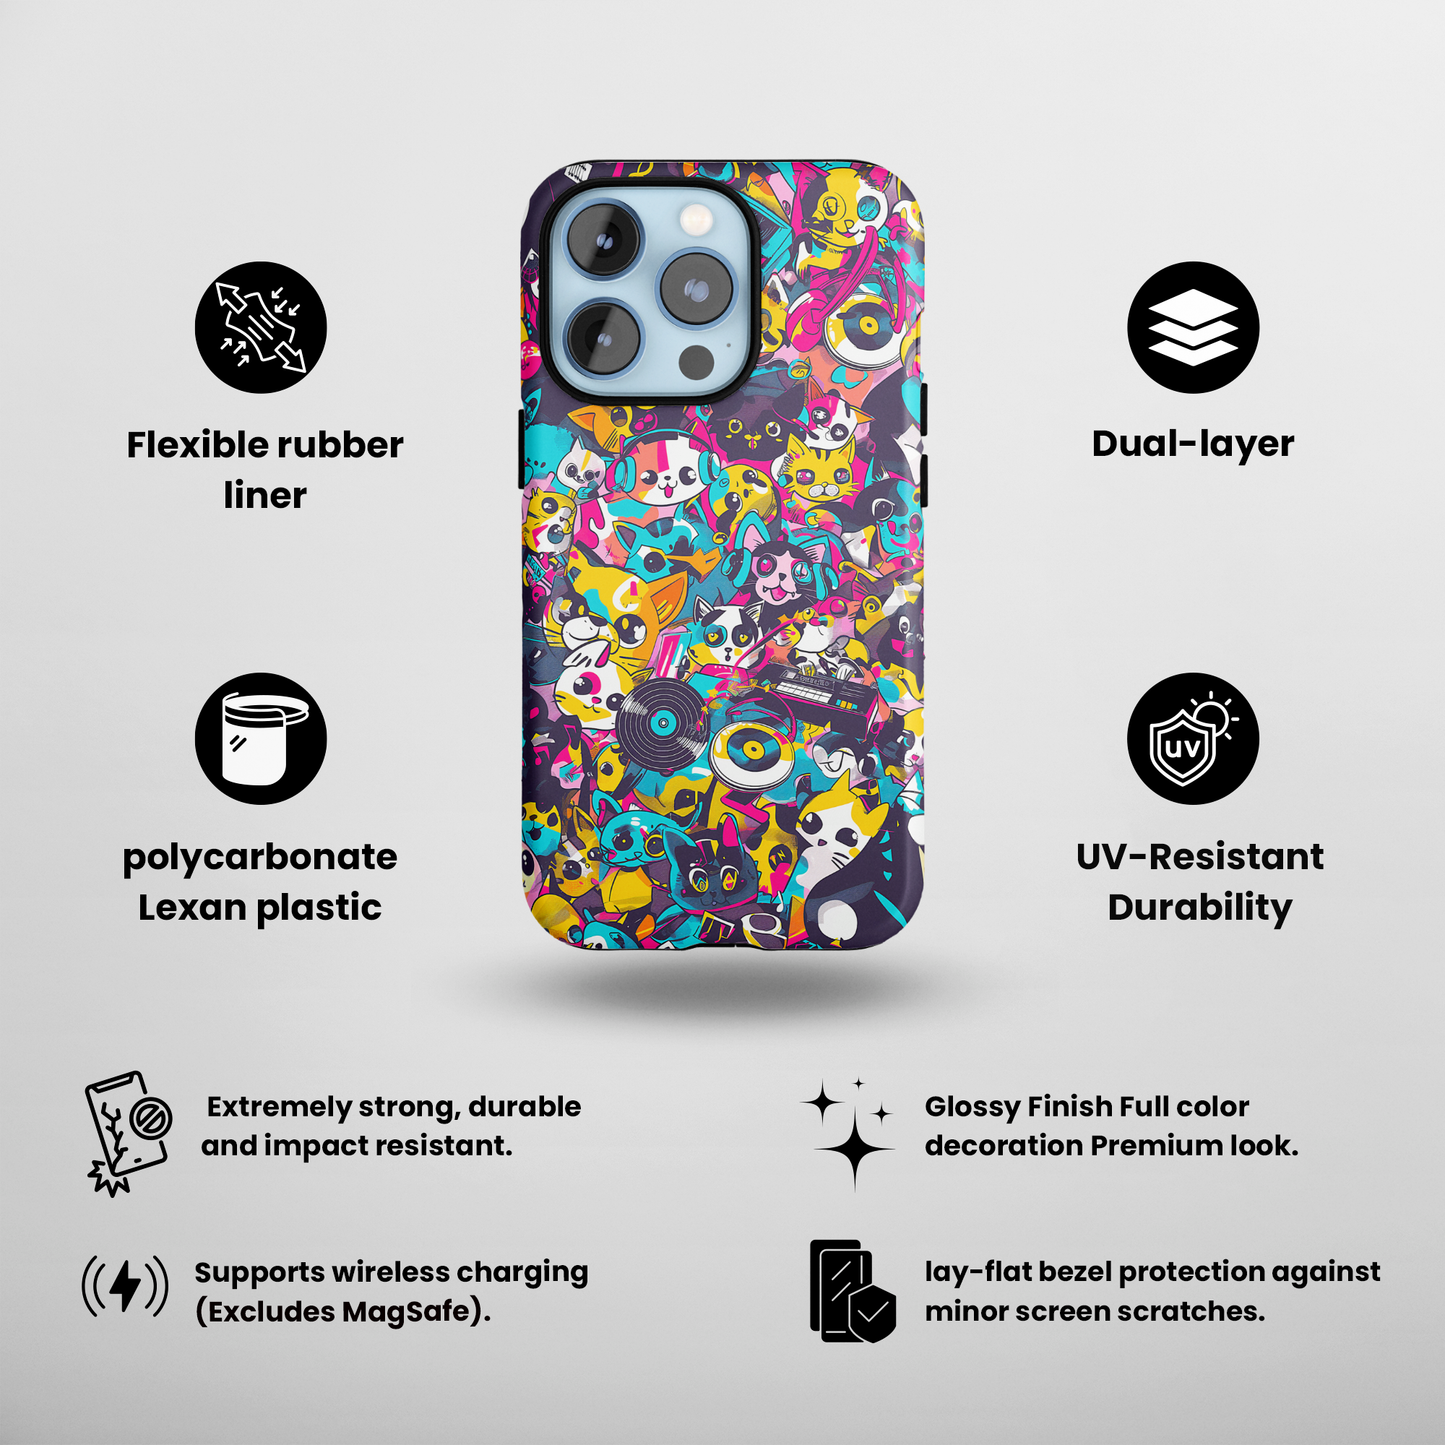 Pop Frenzy (iPhone Case 11-15)Elevate your iPhone's protection and style with RimaGallery's A lively mix of colorful cartoon animals and pop elements On case, featuring dual-layer defense and a sRimaGallery